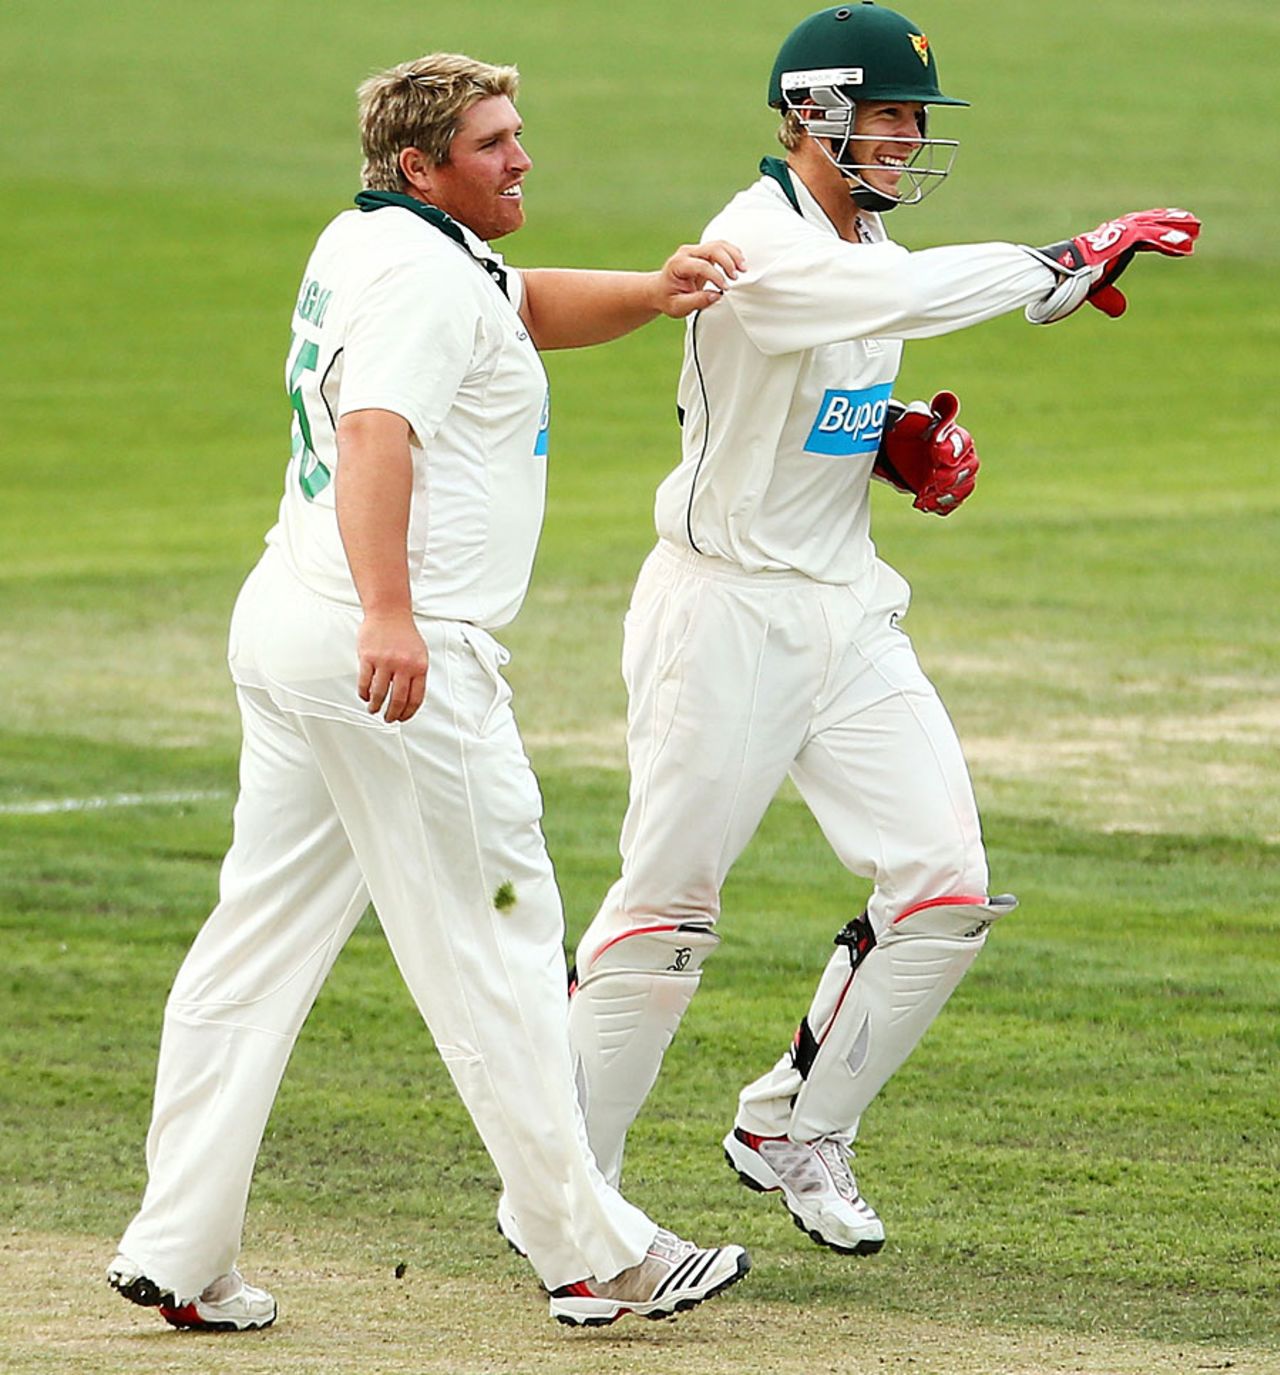 Mark Cosgrove and Tim Paine celebrate a wicket, Tasmania v Victoria, Sheffield Shield, Hobart, 2nd day, March 15, 2013